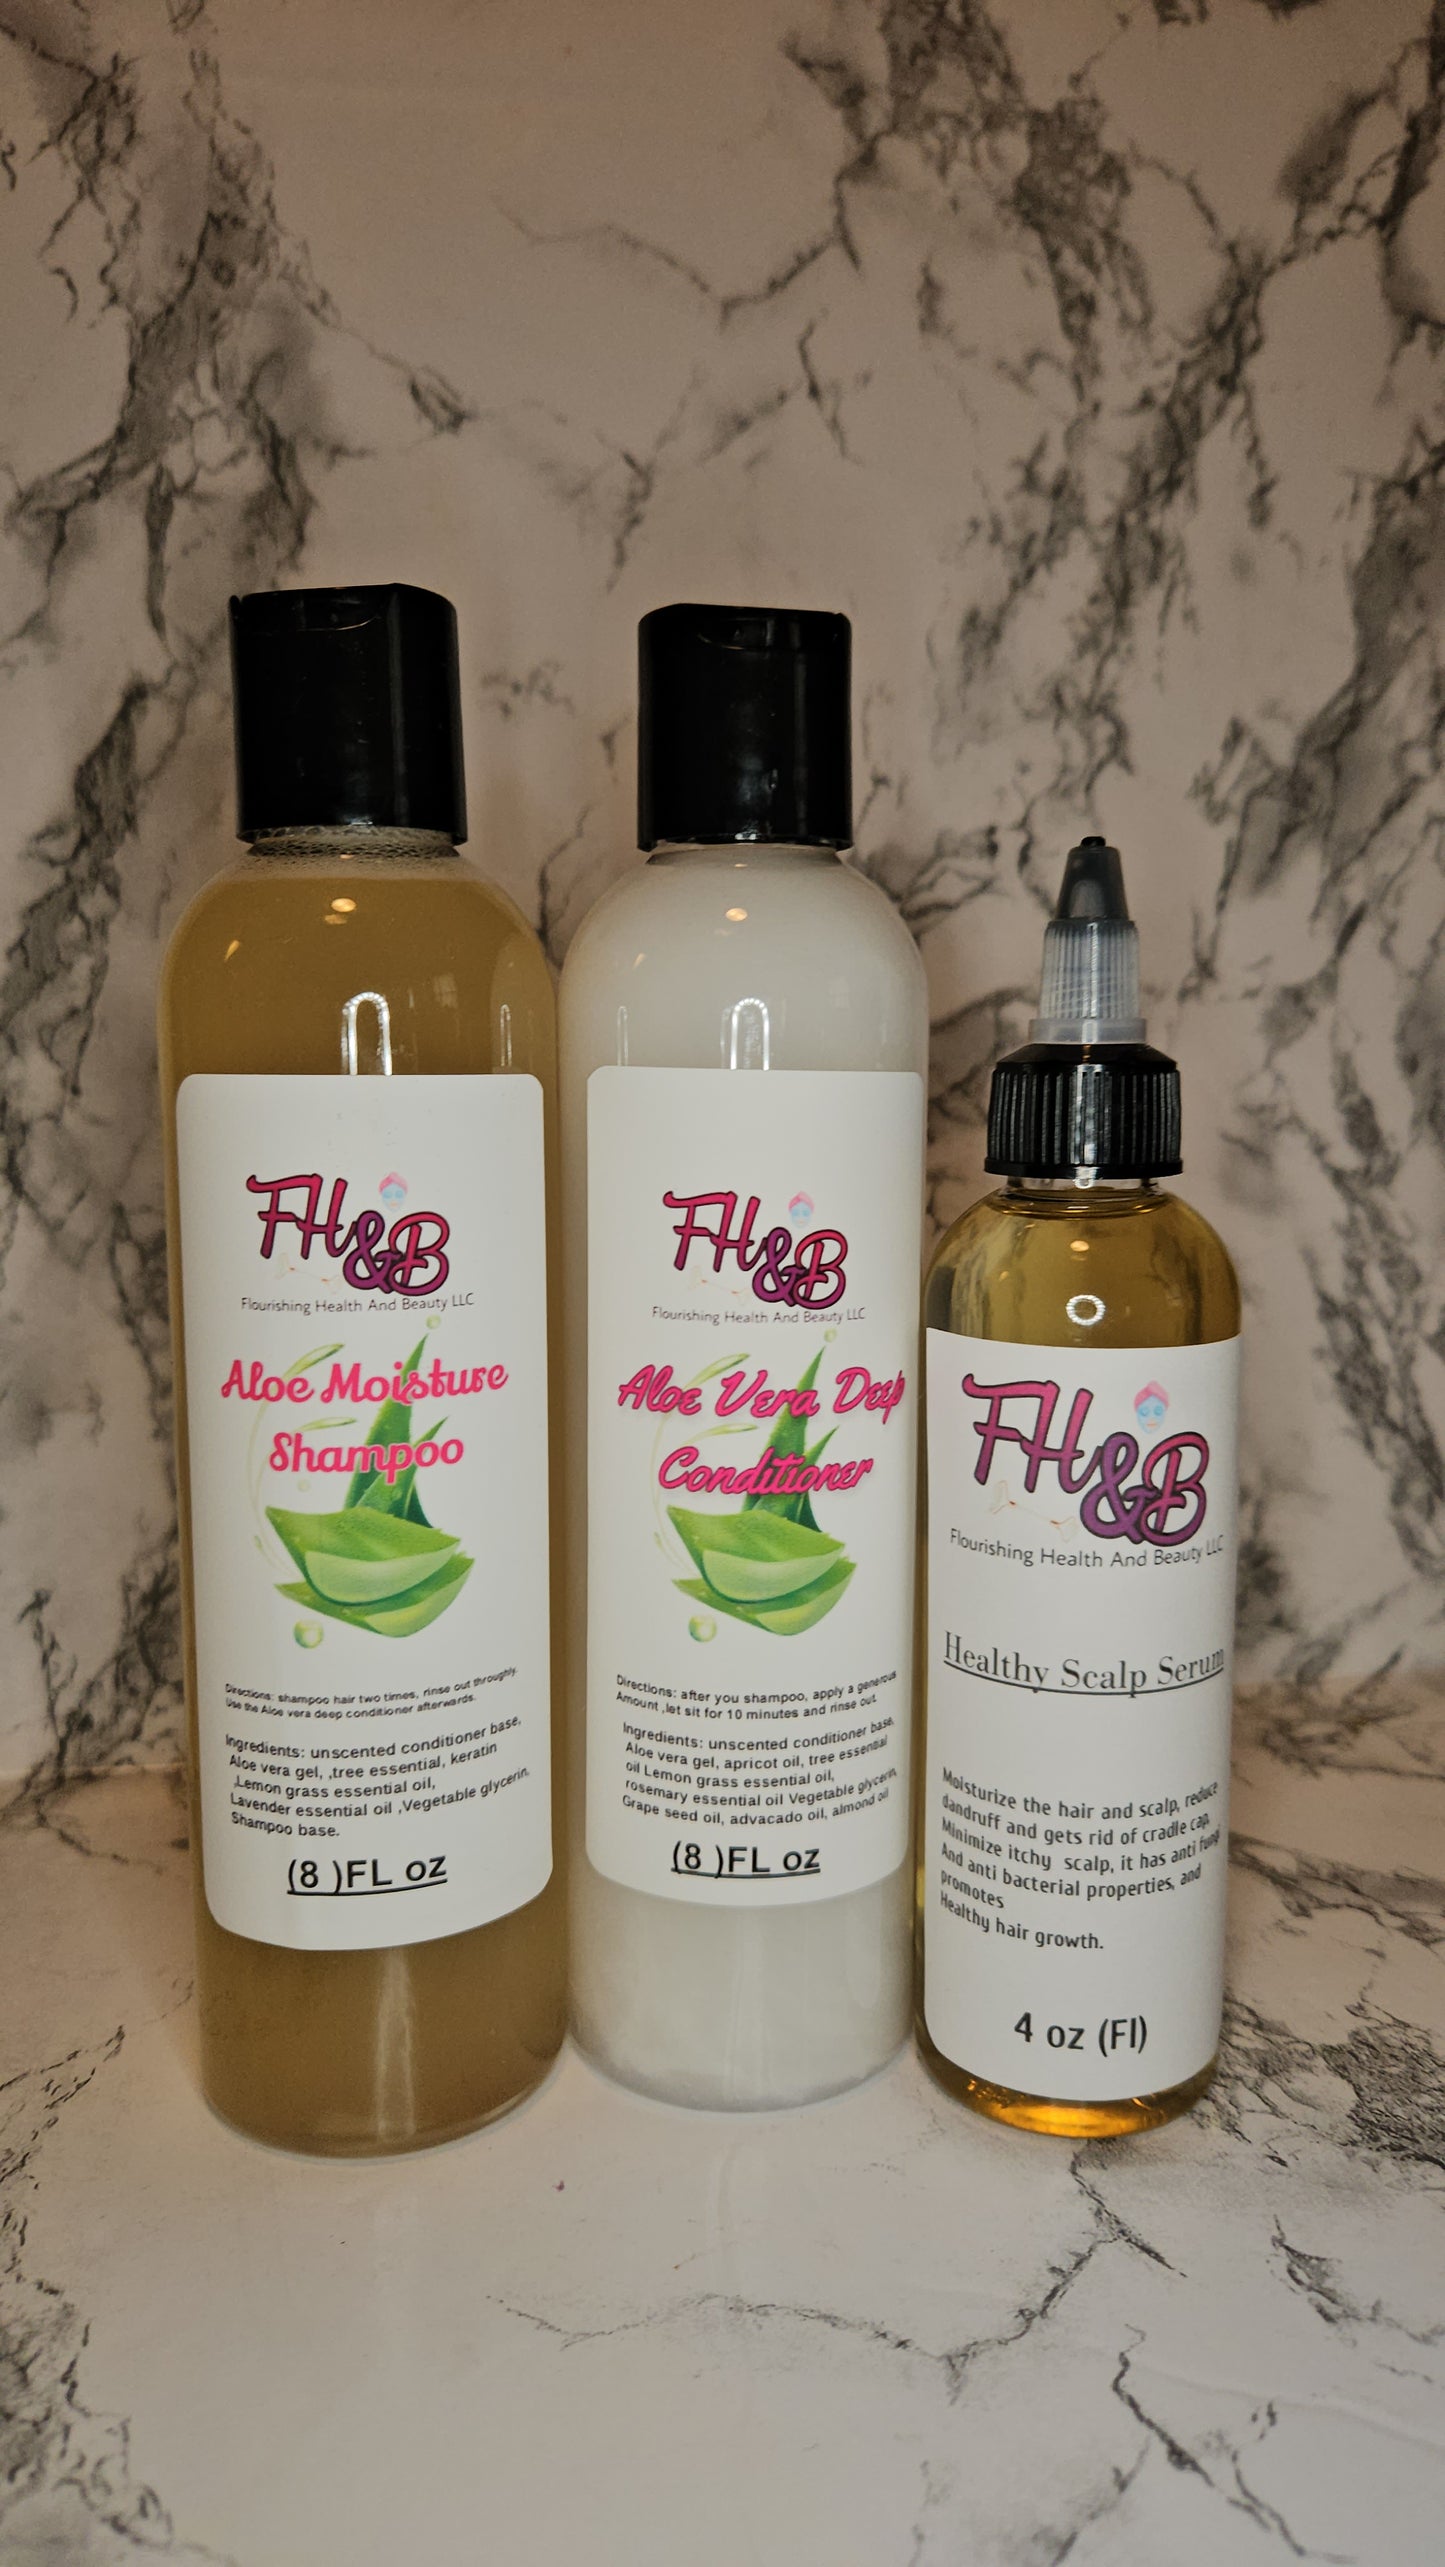 Hair care / growth products